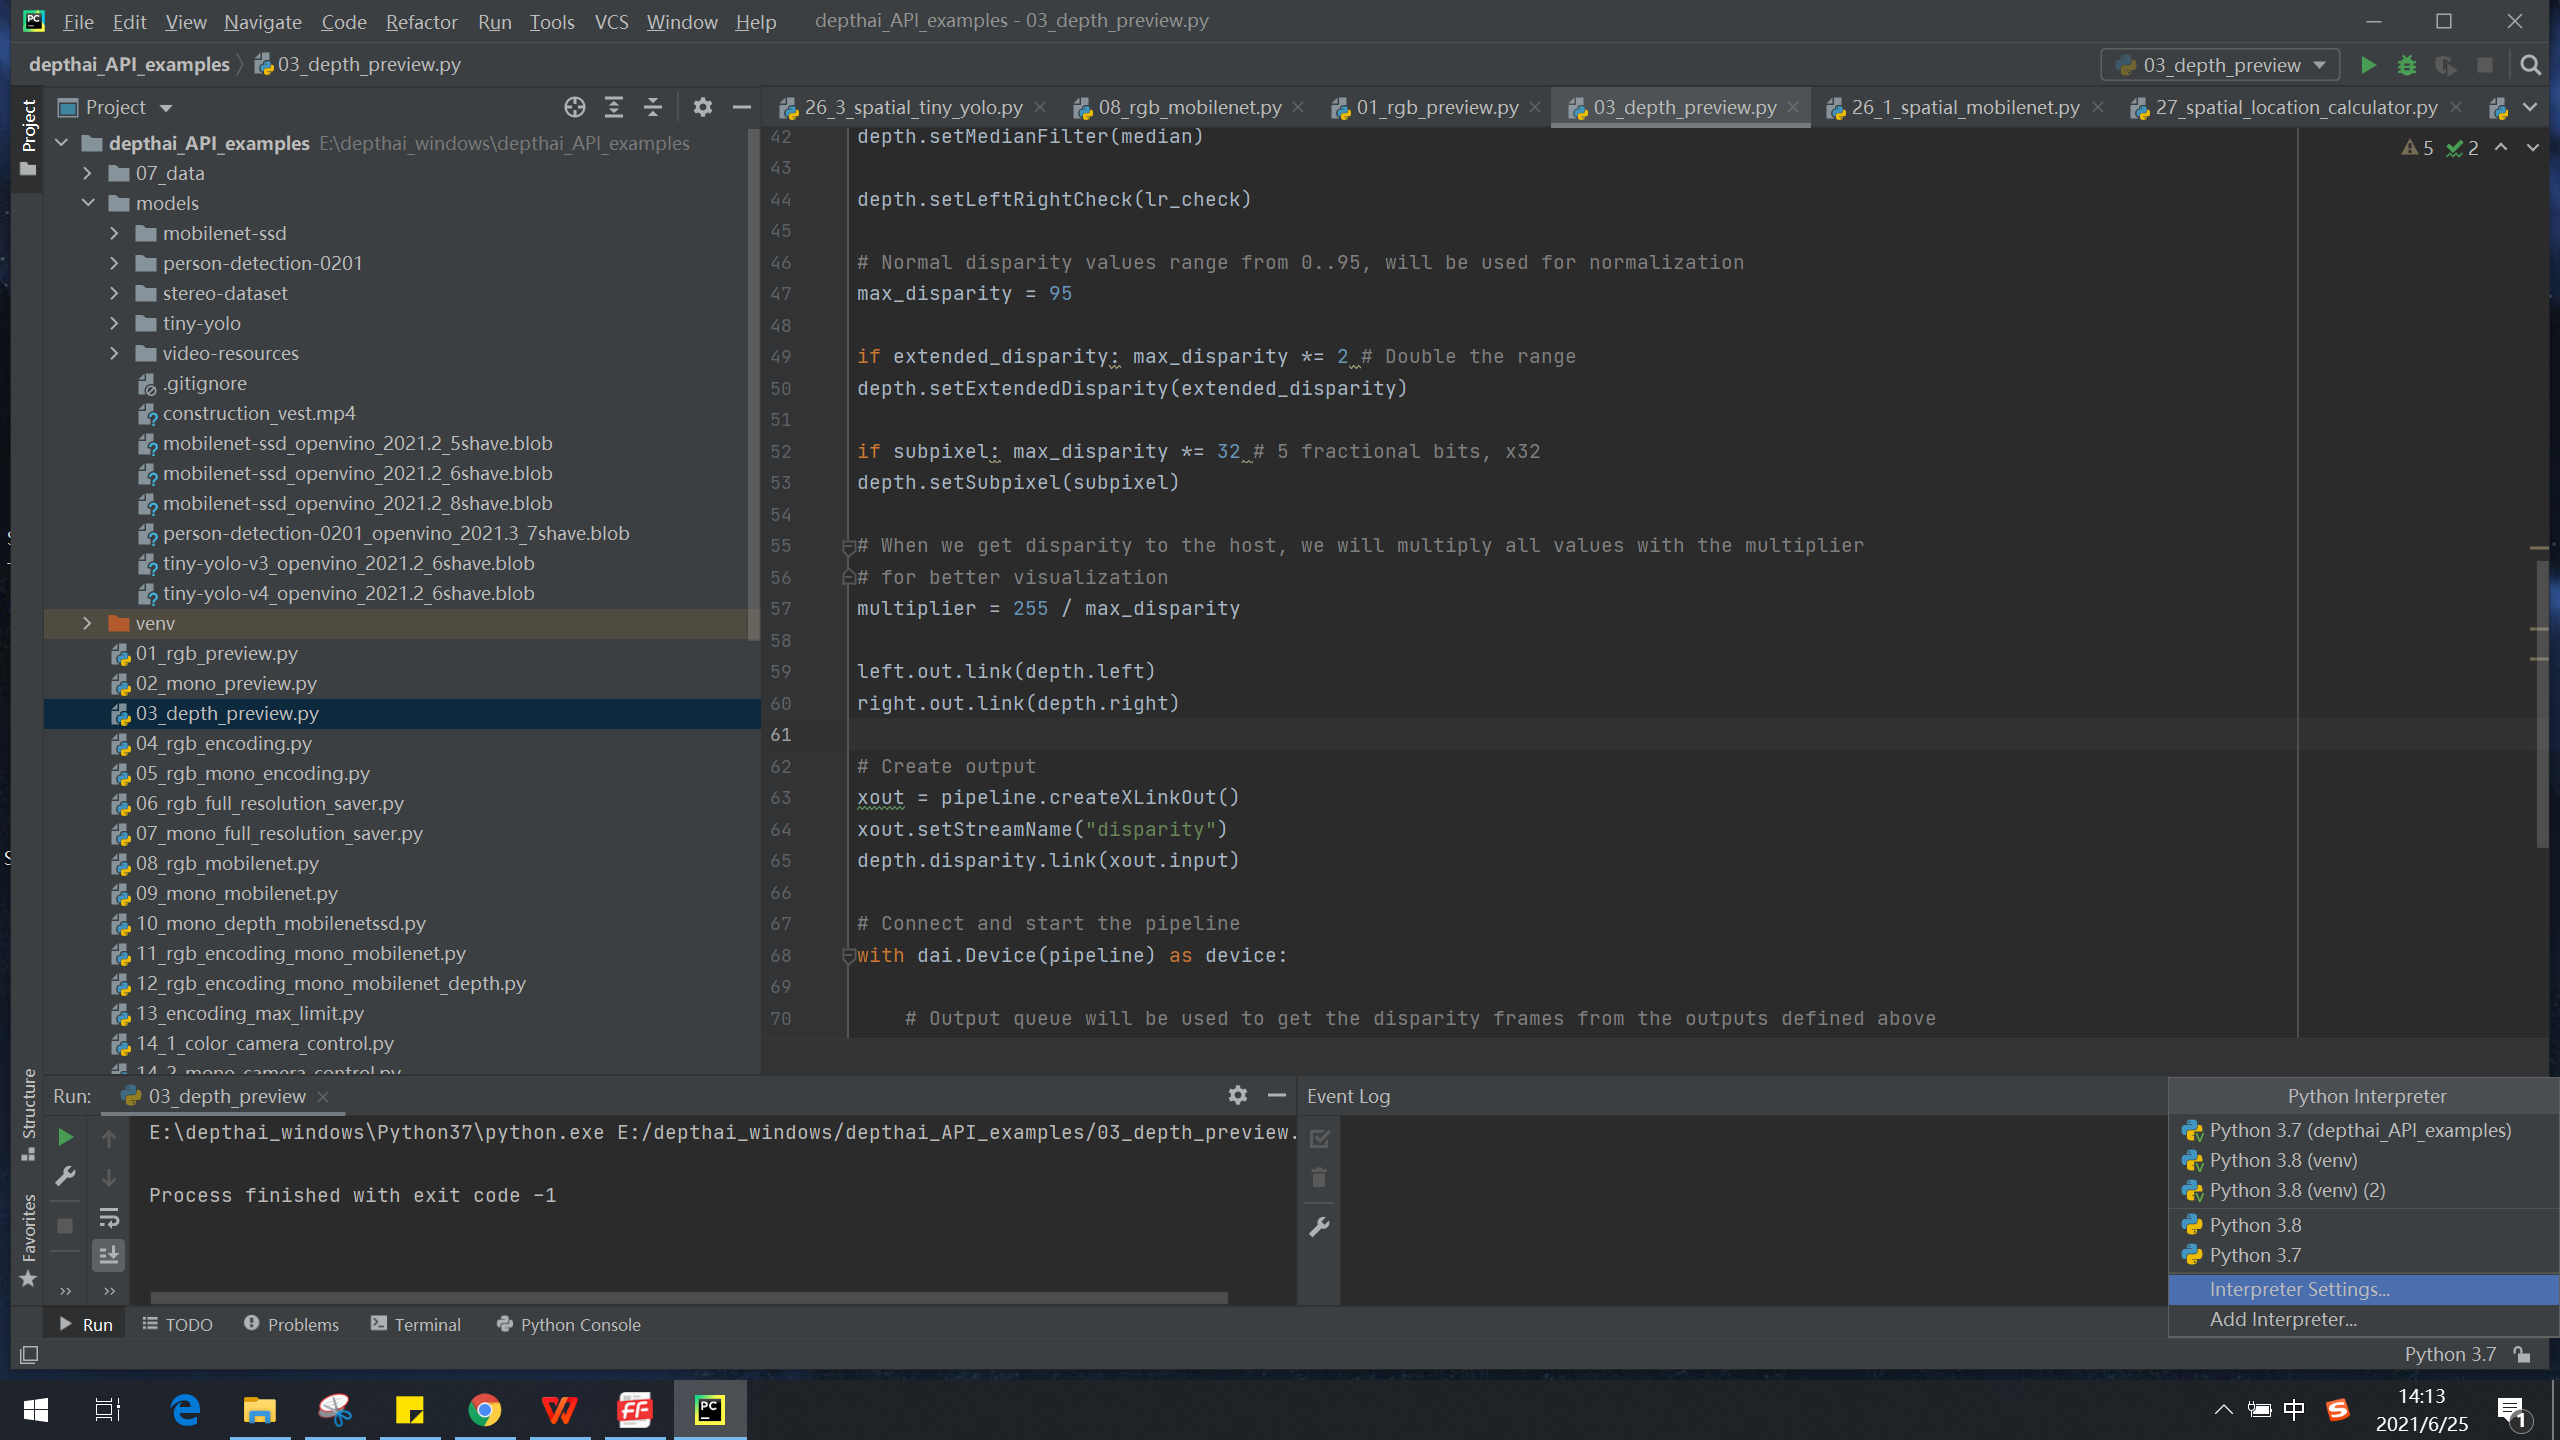 ../../_images/pycharm3.png